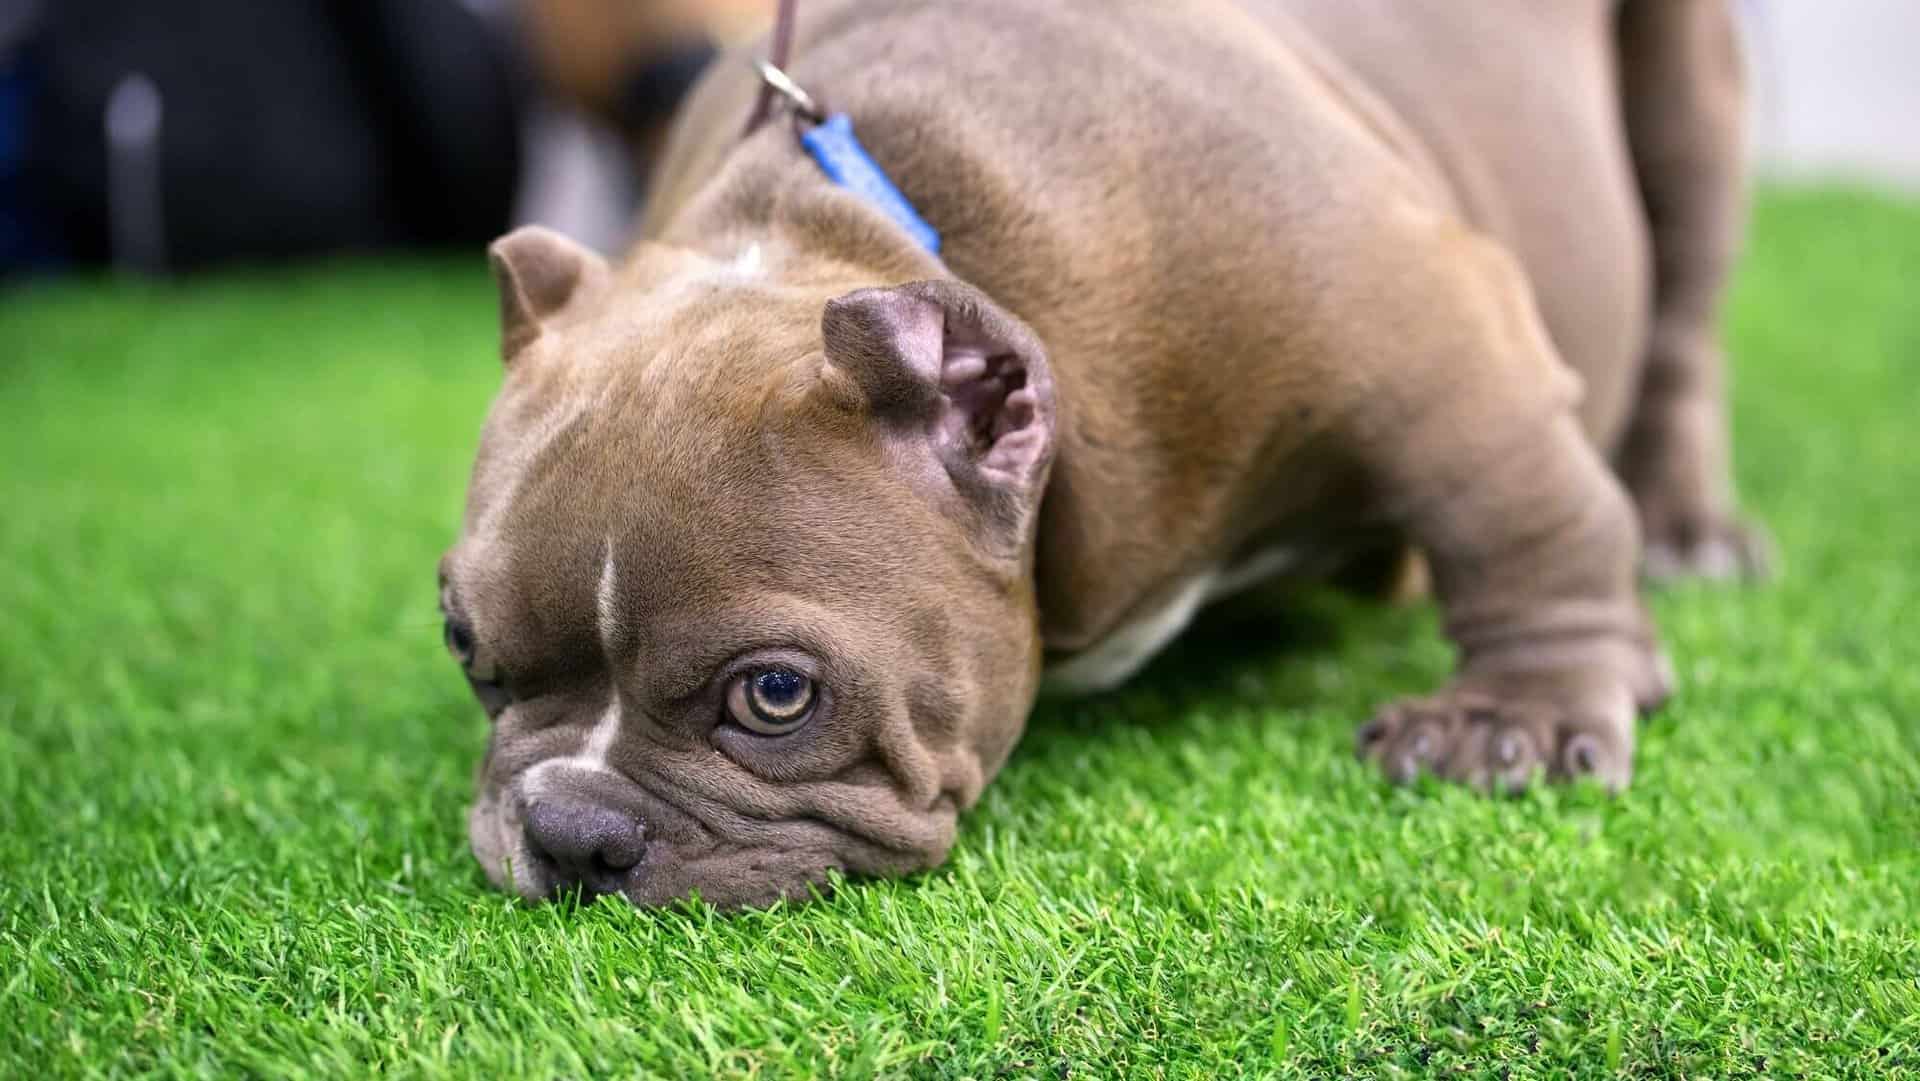 Puppy smelling artificial grass.